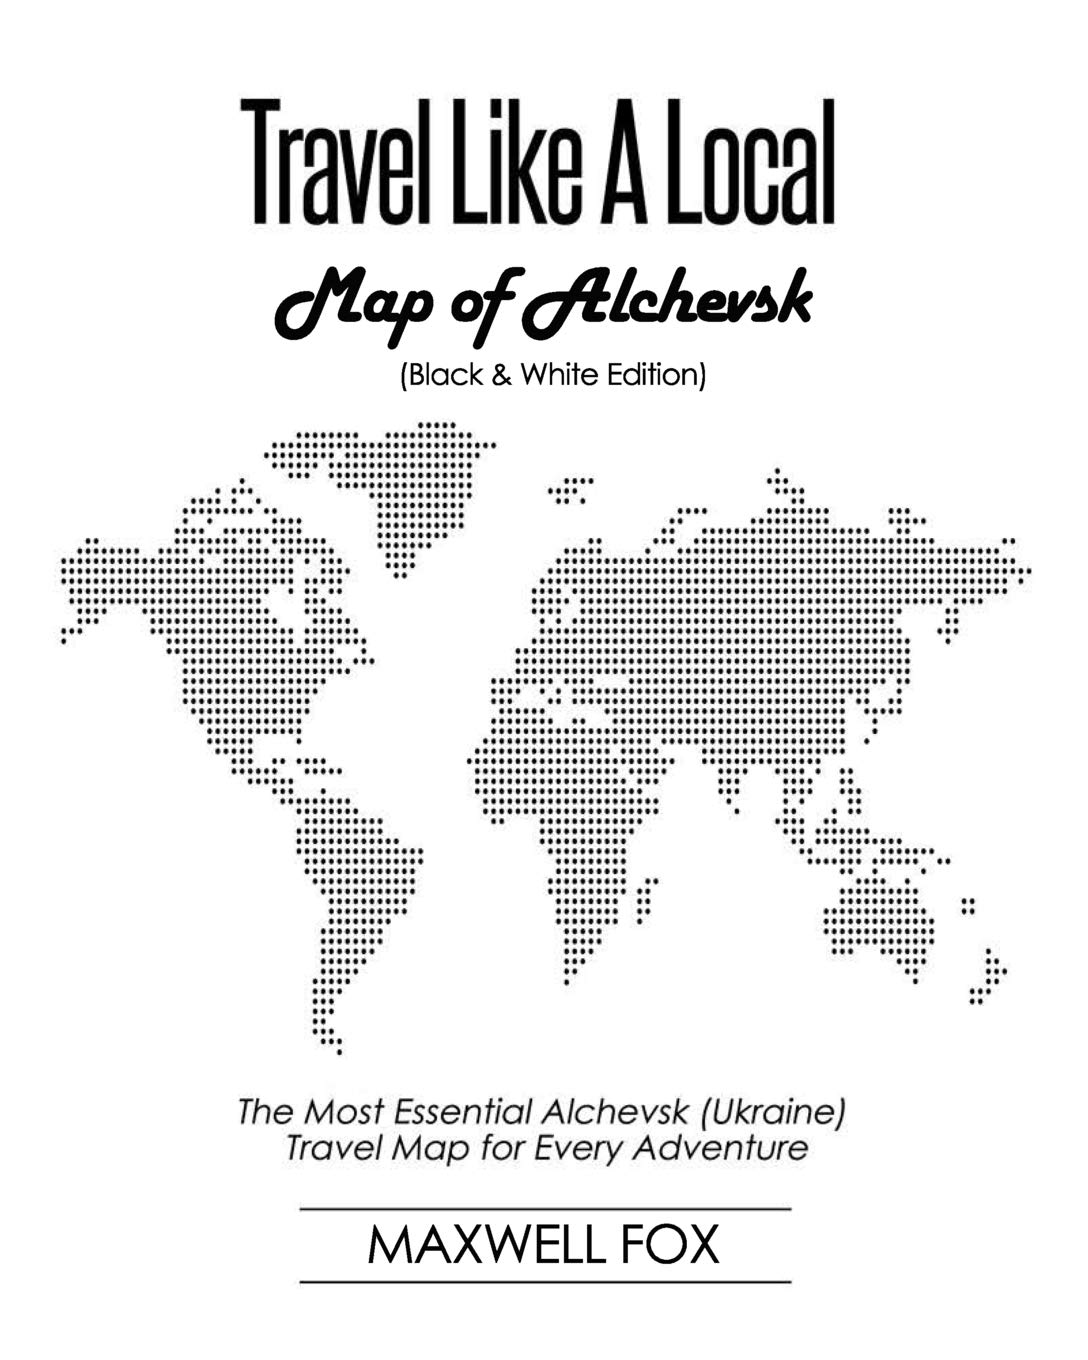 Travel Like a Local - Map of Alchevs'k: The Most Essential Alchevs'k (Ukraine) Travel Map for Every Adventure